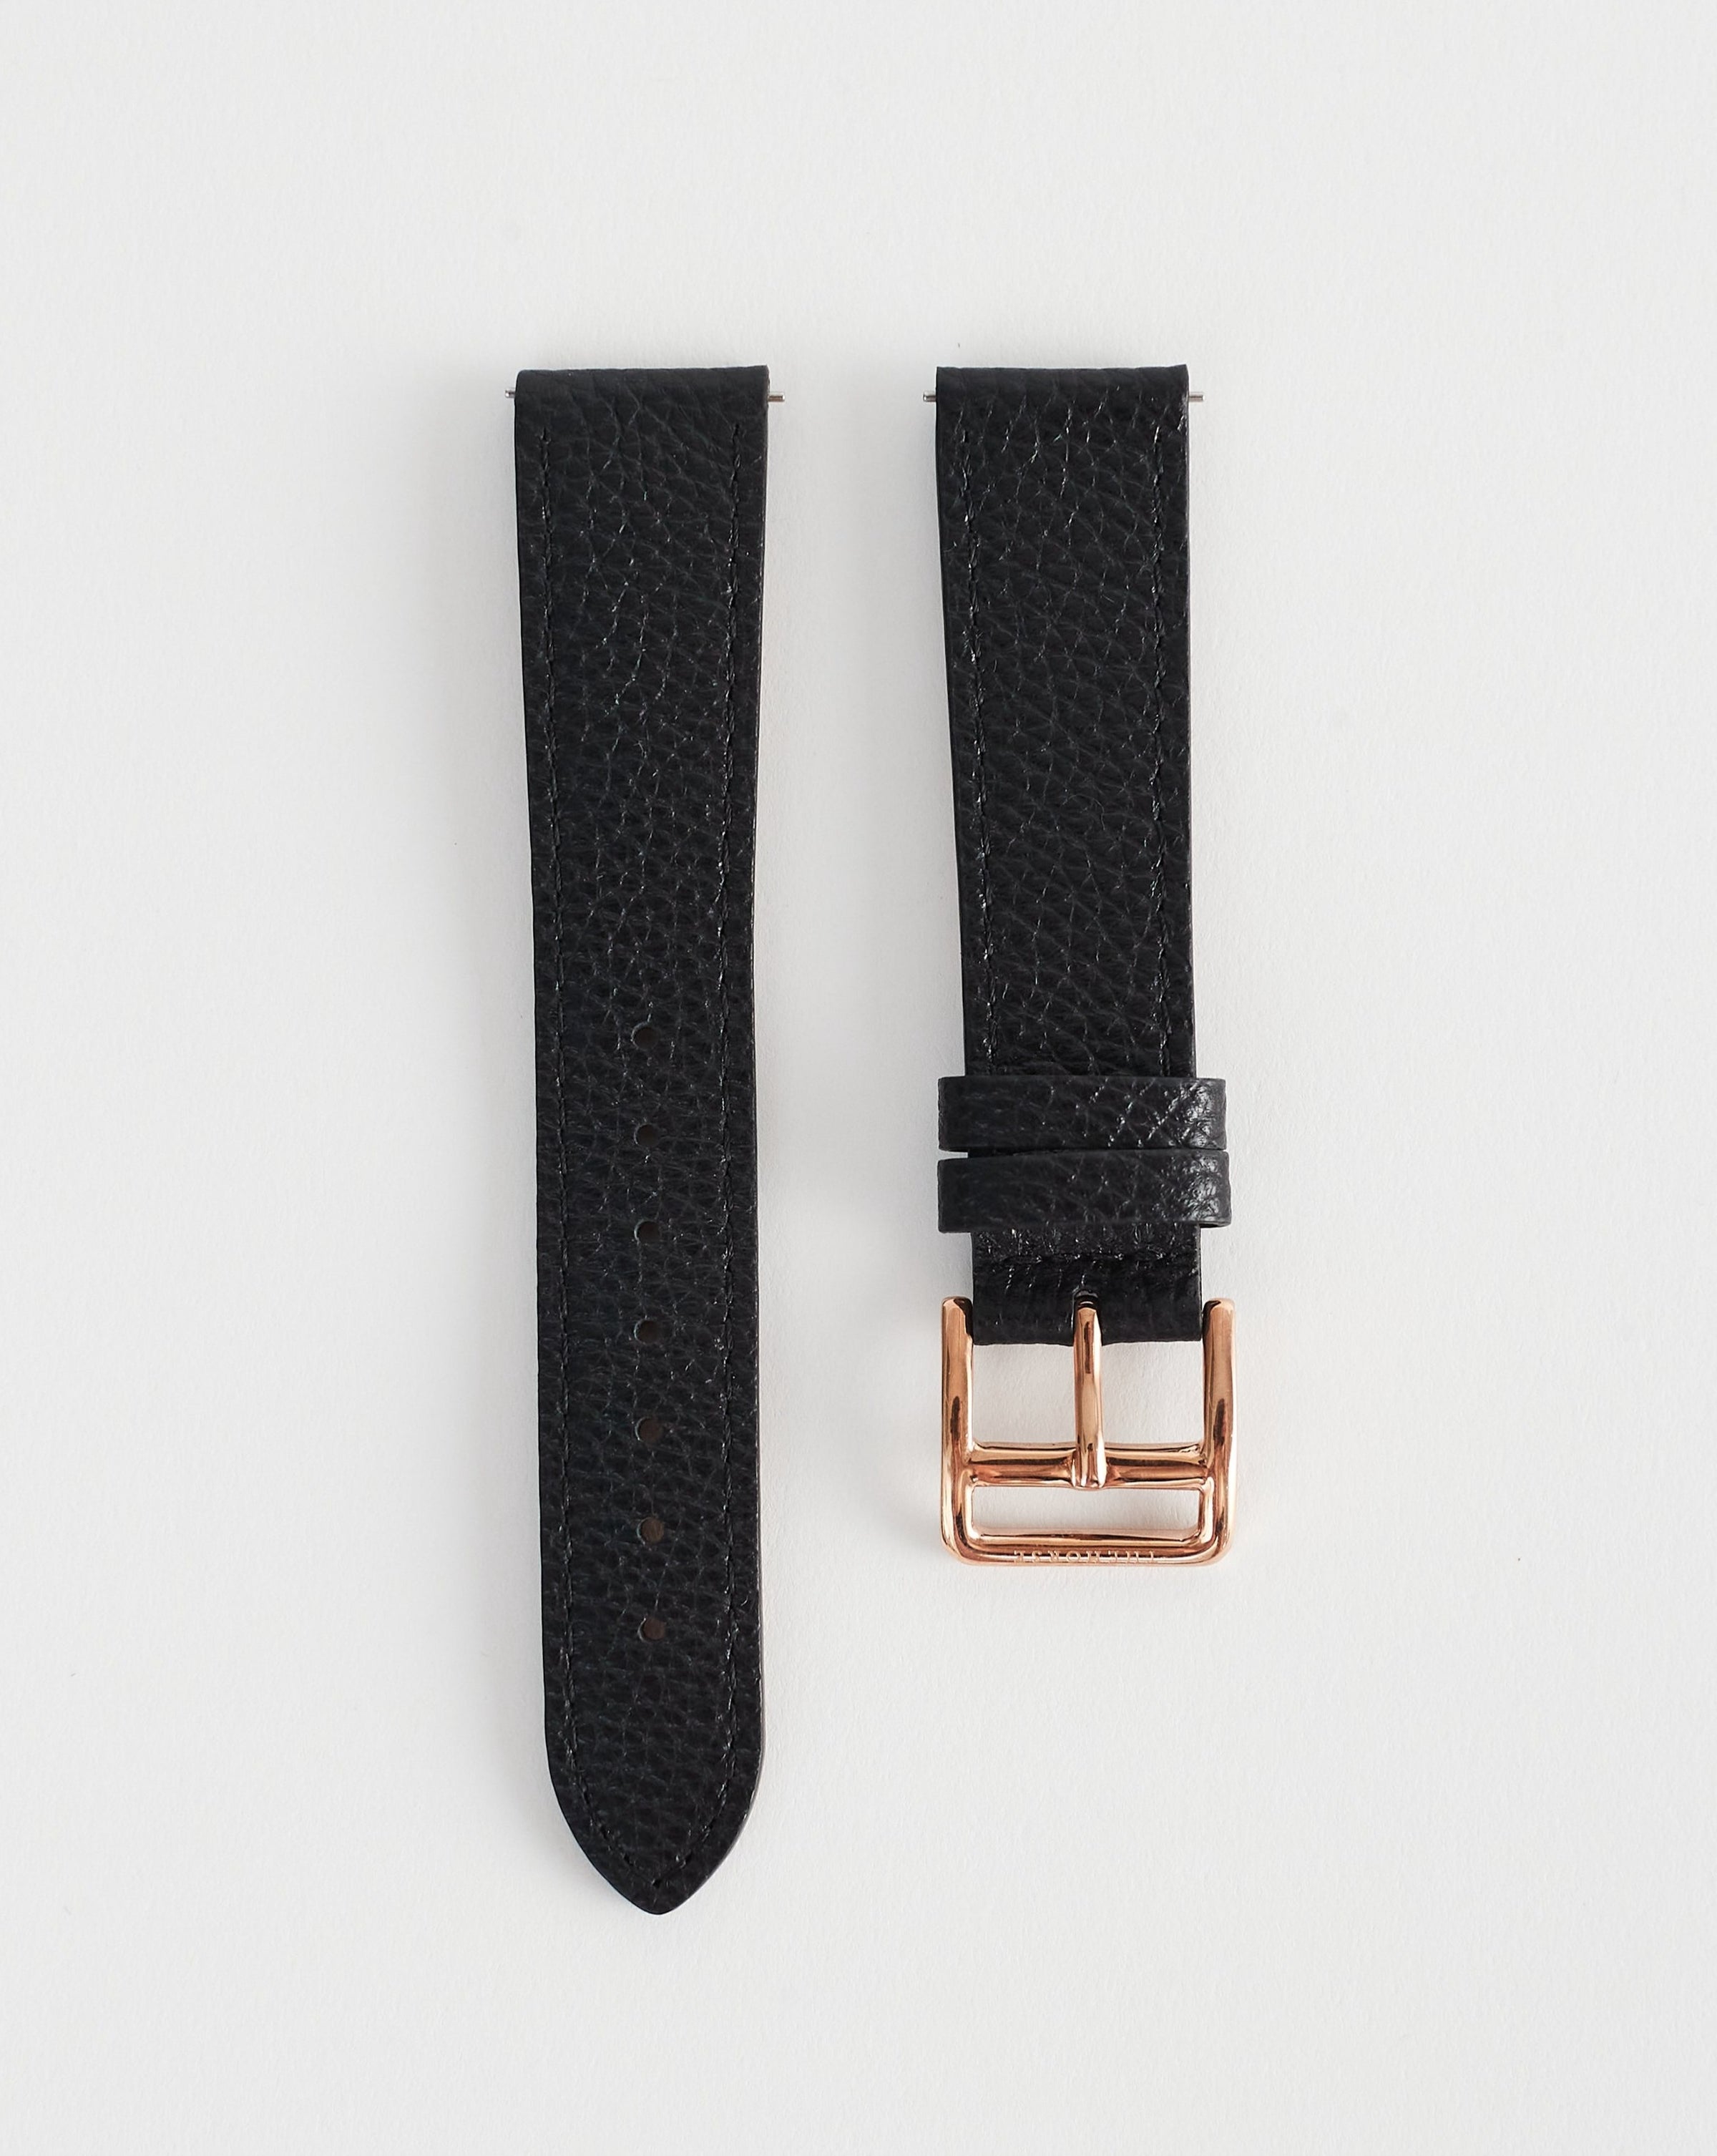 The 18mm Dress Watch in Black Leather / Rose Gold Strap by The Horse®